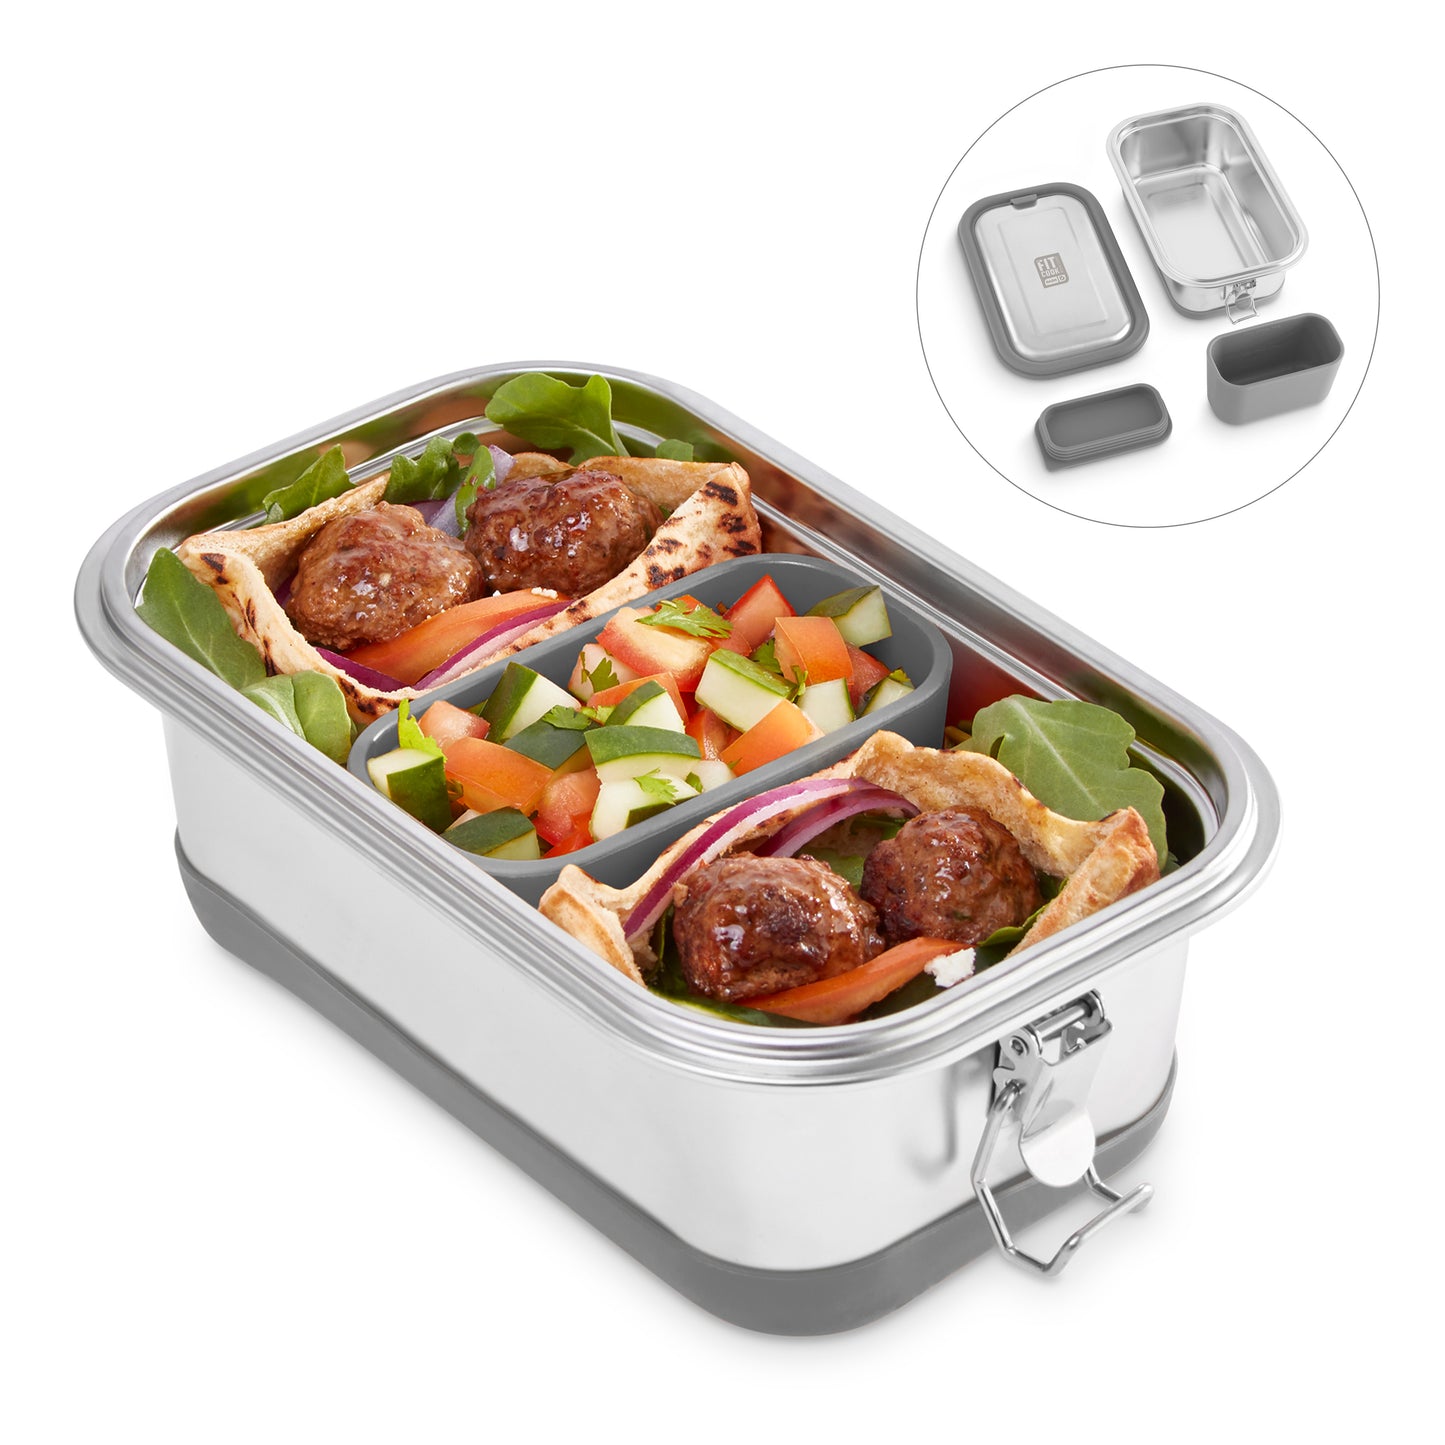 Stainless Steel Lunch Box Tools and Gadgets The Fit Cook x Dash Slate  